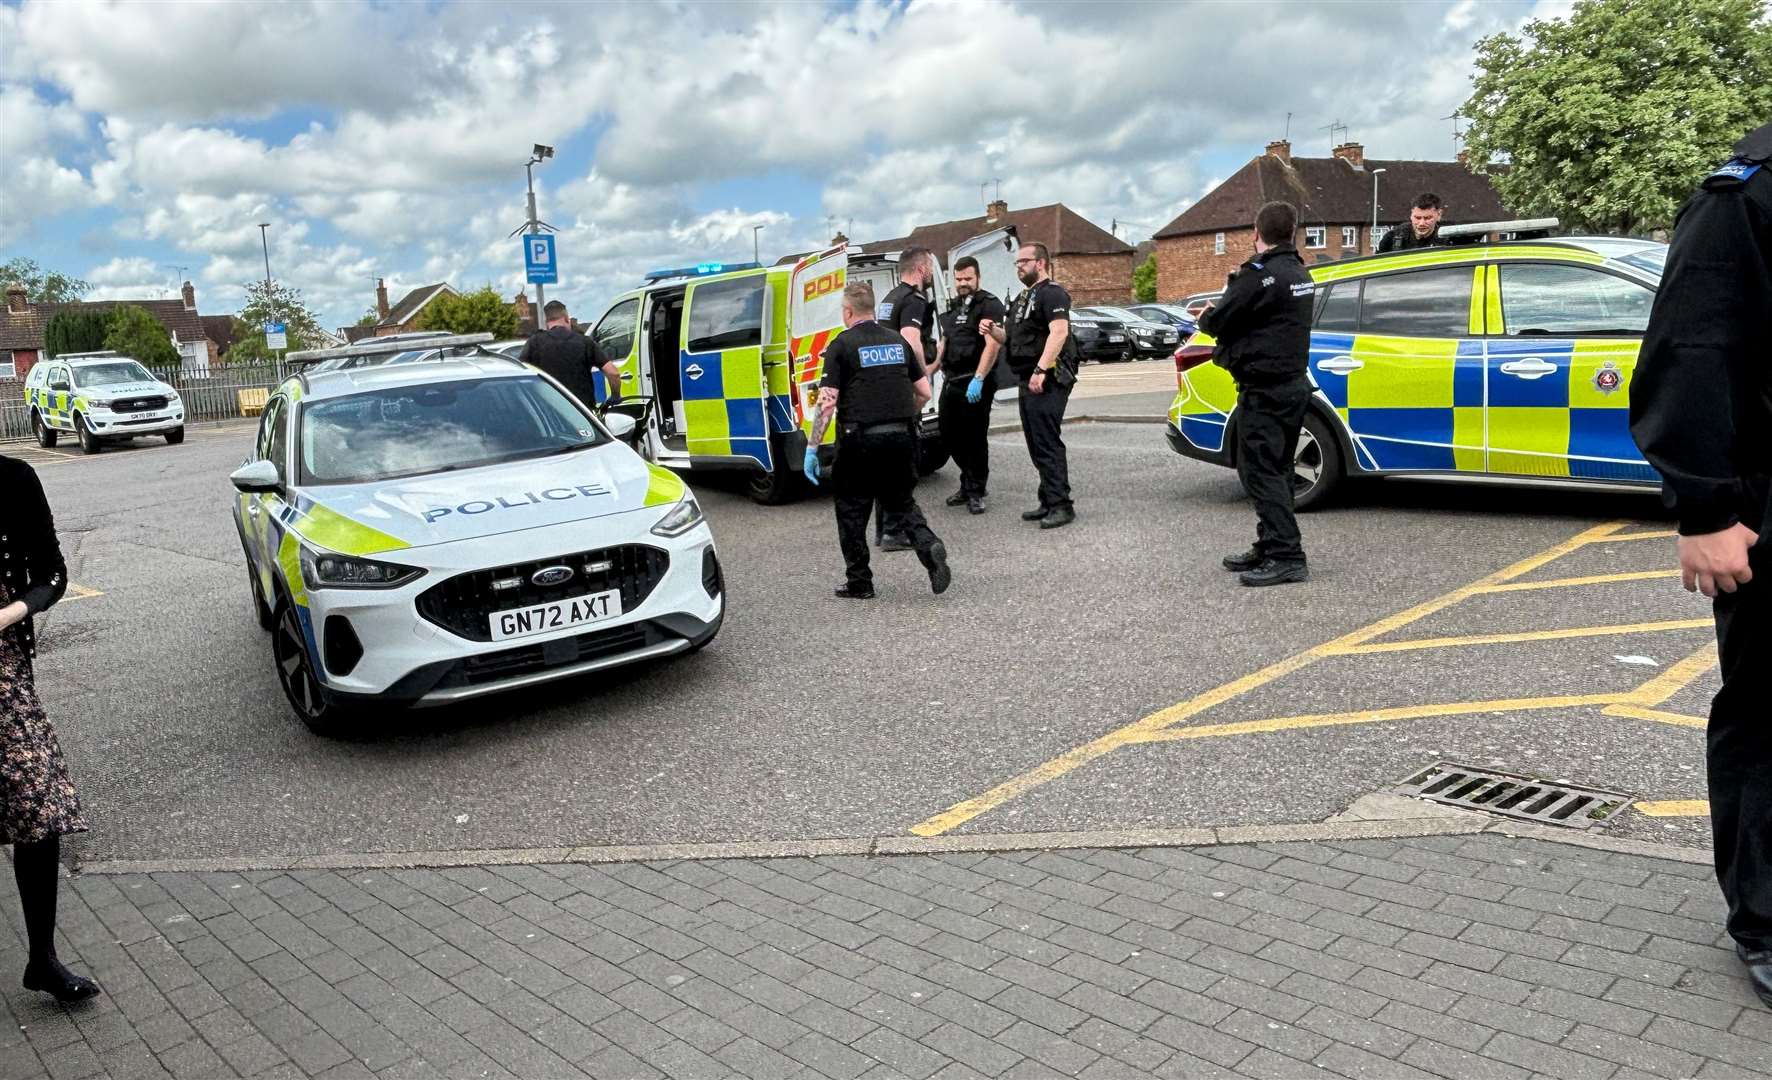 At least eight officers attended Lidl in New Street, Ashford. Picture: Joe Harbert